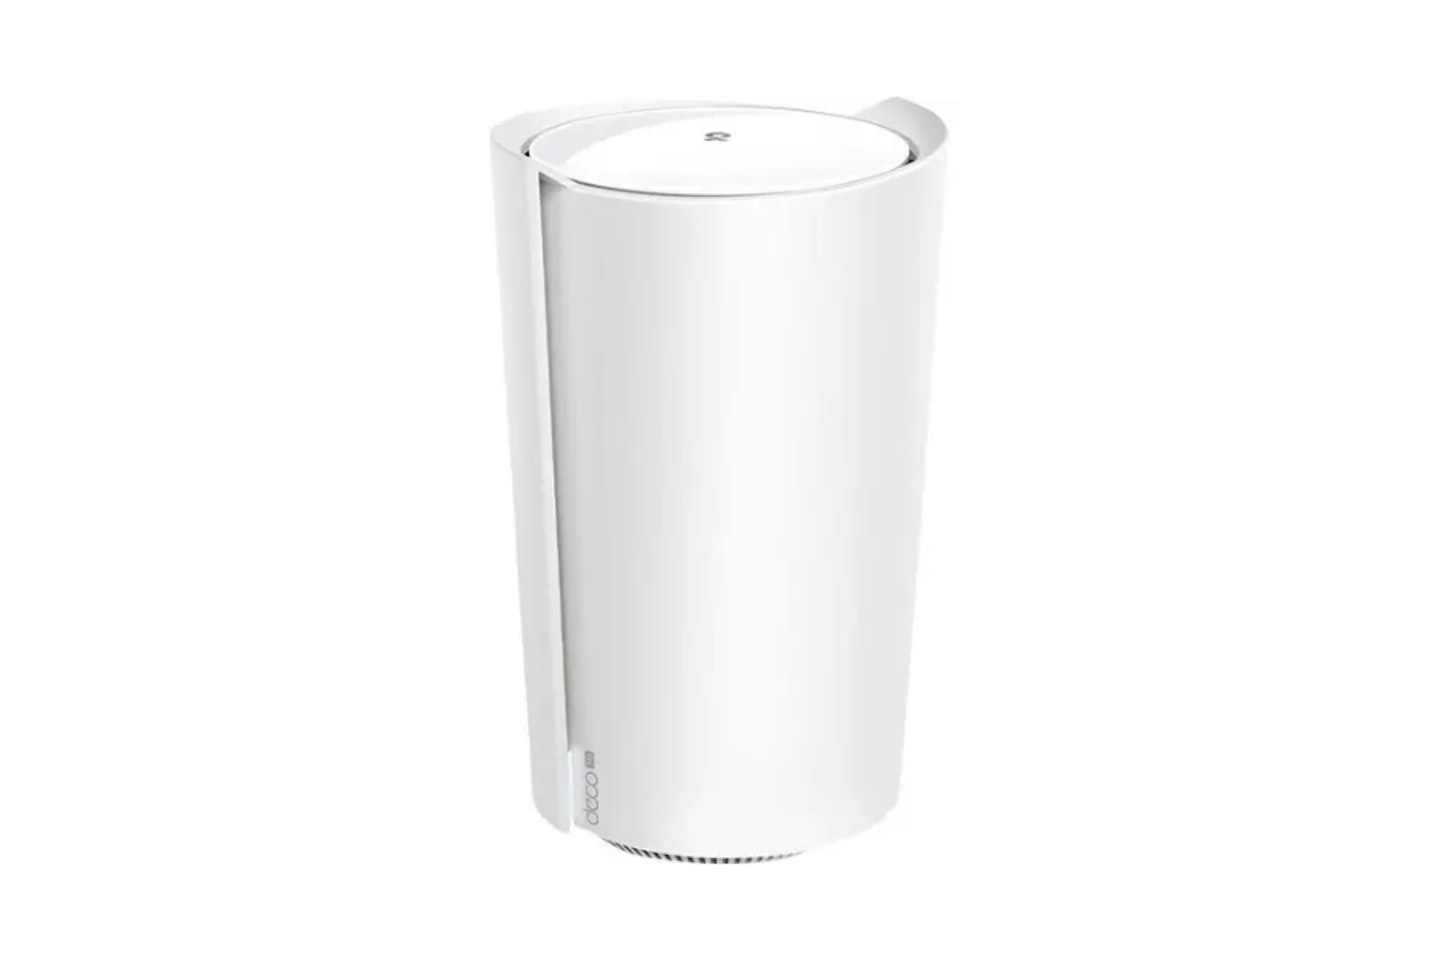 TP-LINK Deco X80-5G V1 Whole Home Mesh WiFi 5G Router